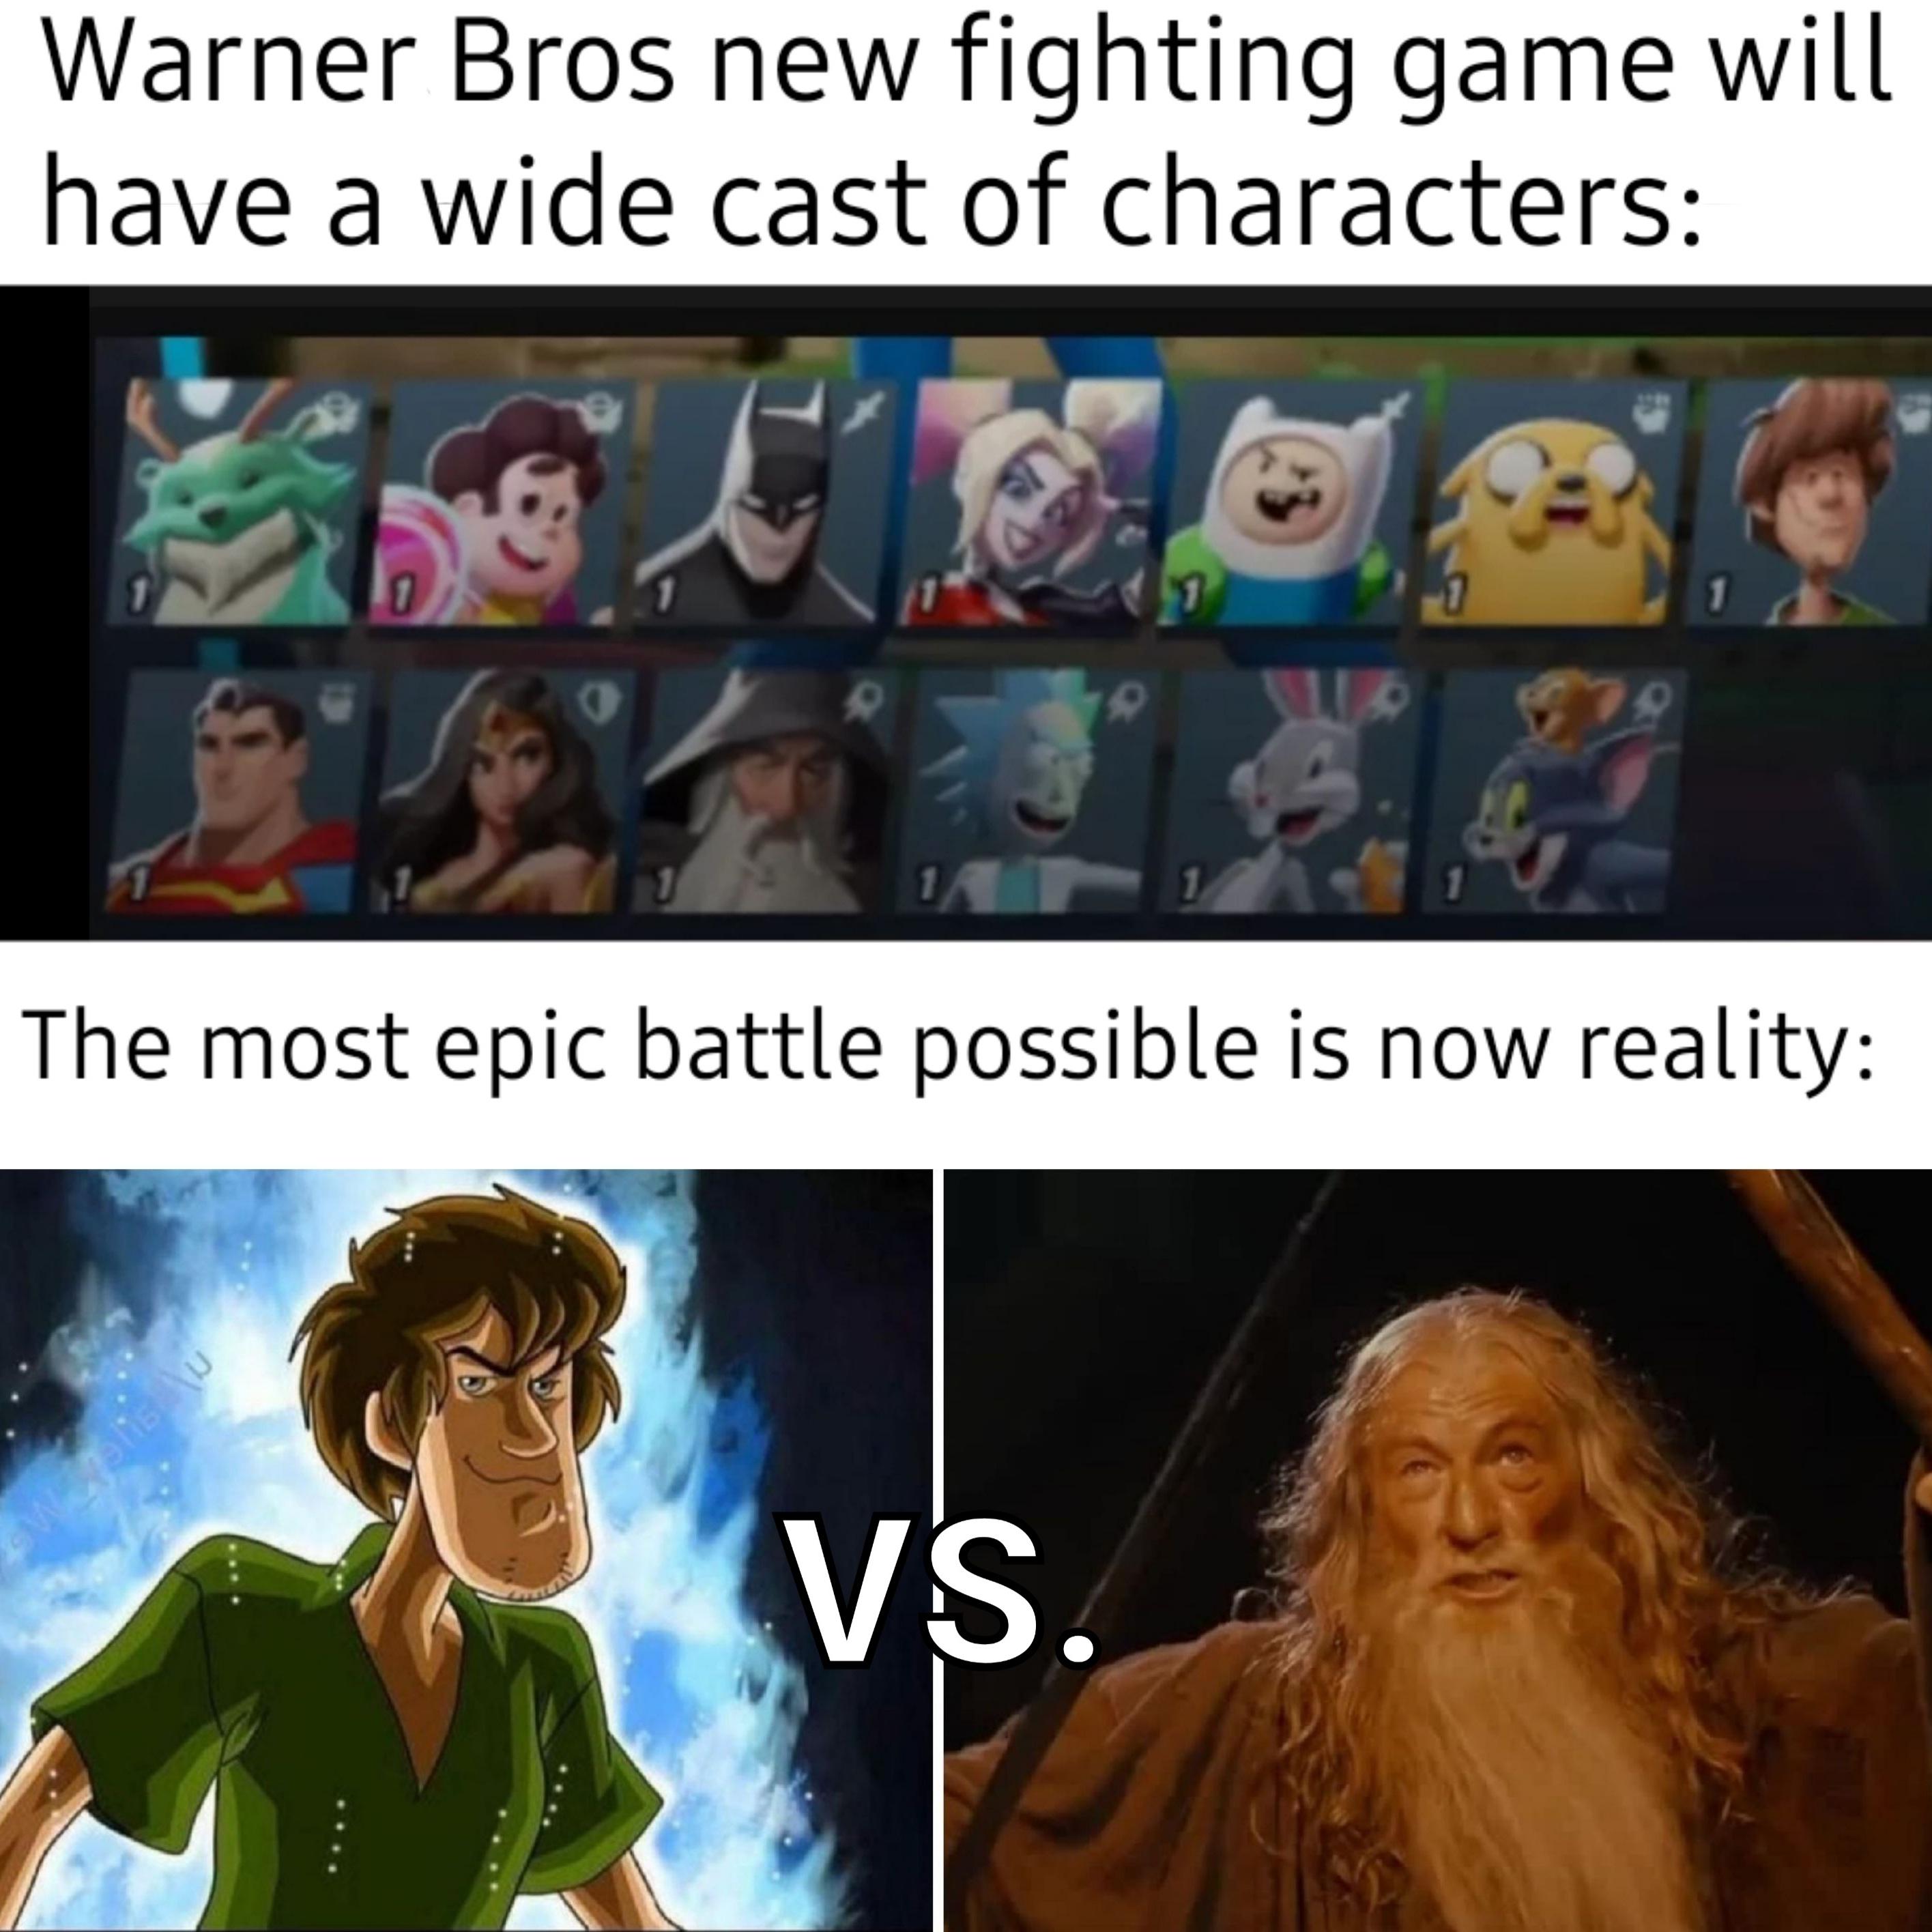 gaming memes - you shall not post - Warner Bros new fighting game will have a wide cast of characters Ref The most epic battle possible is now reality Vs.